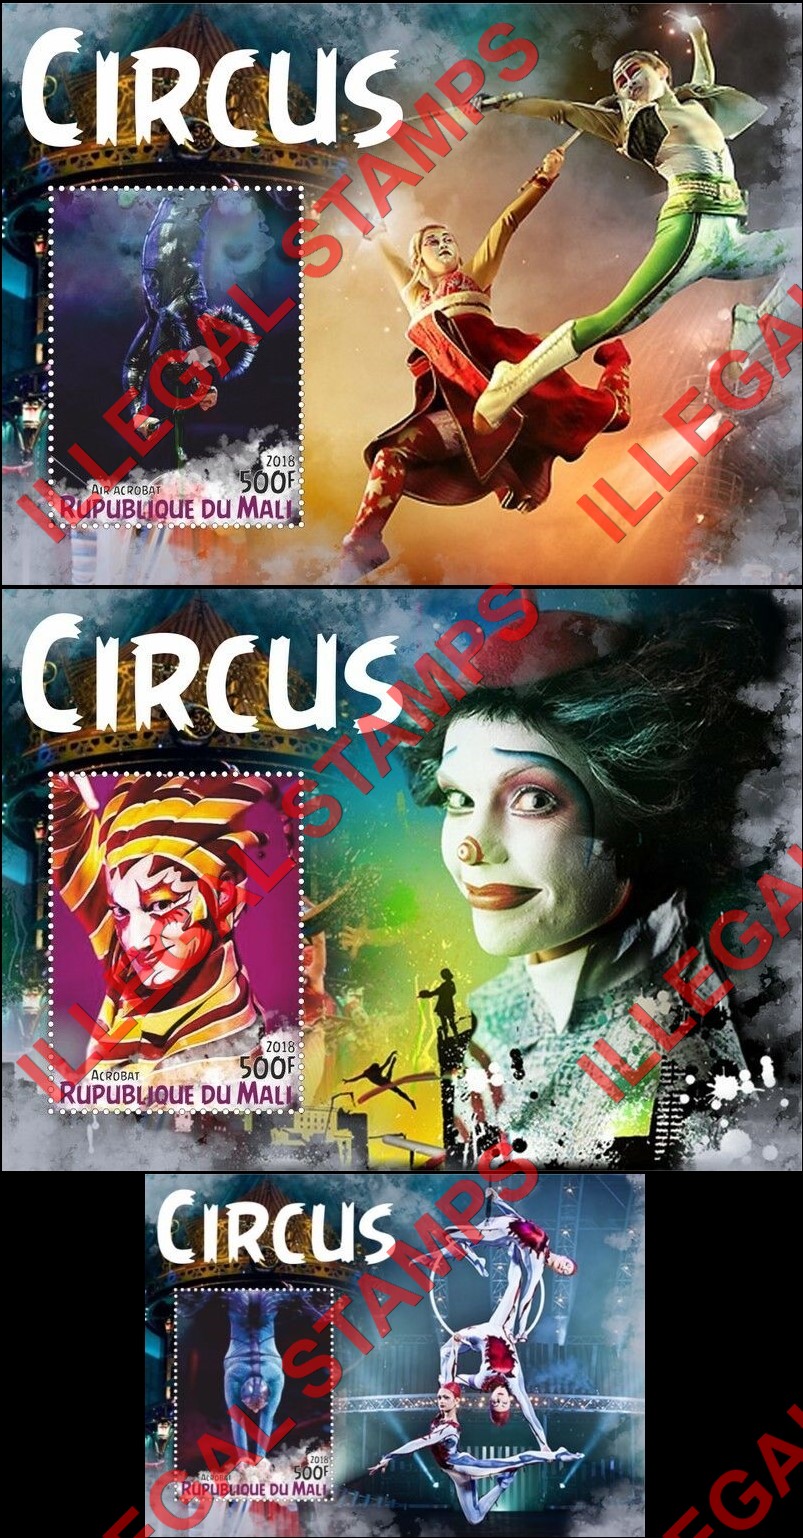 Mali 2018 Circus Illegal Stamp Souvenir Sheets of 1 (Part 1)